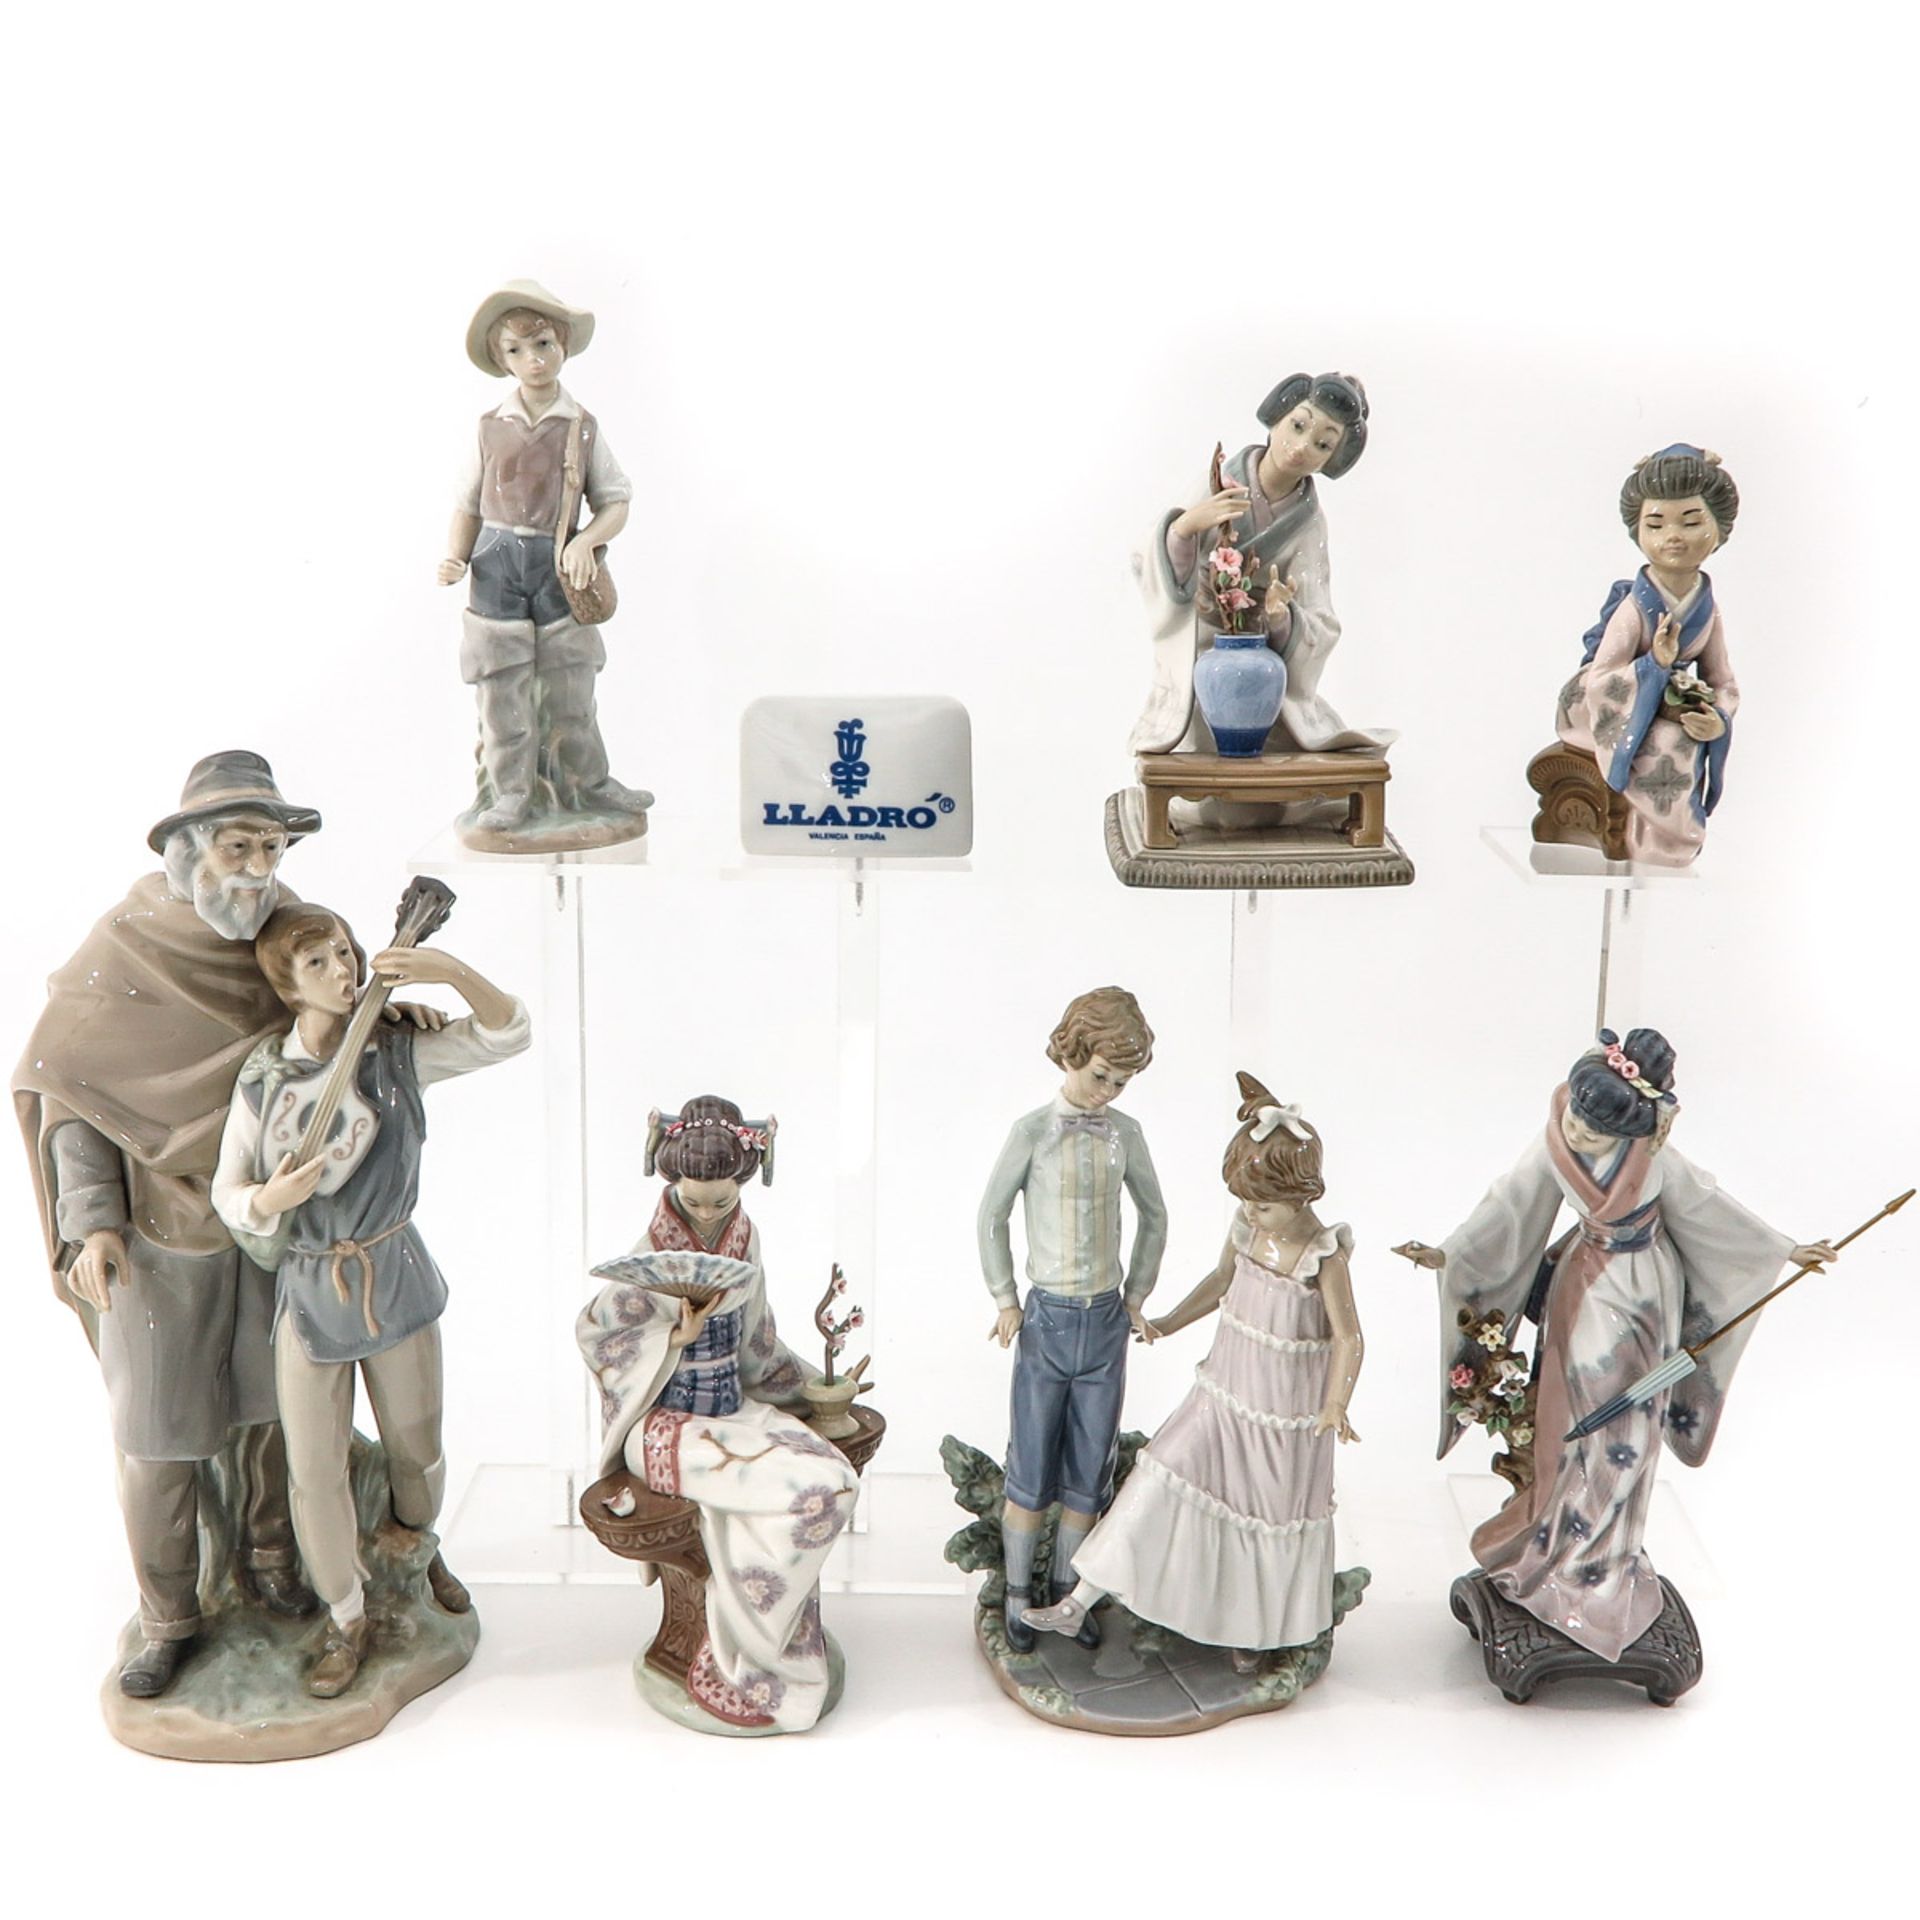 A Collection of 8 Pieces of Lladro